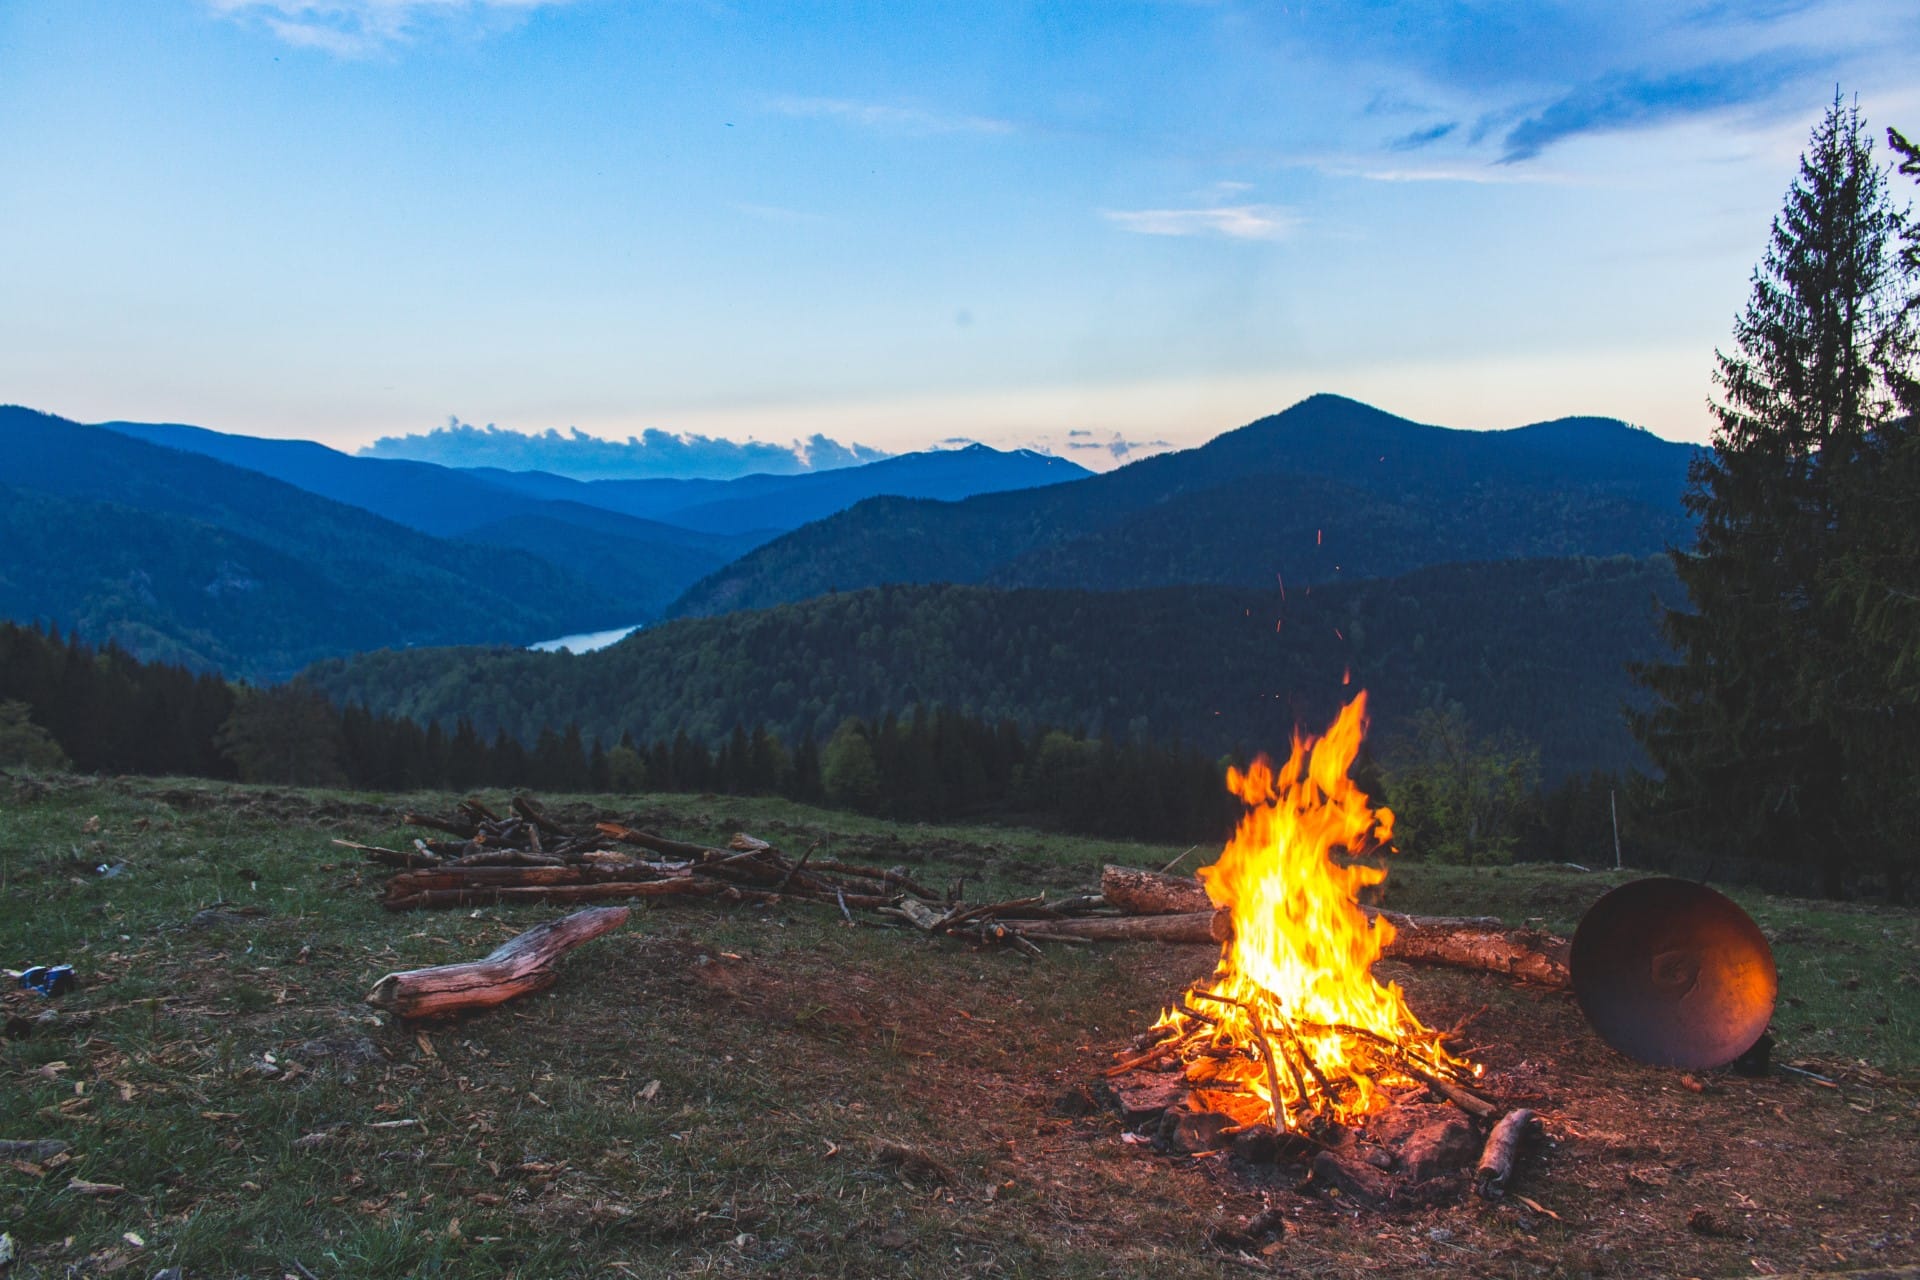 camp fire at sunset with mountain views